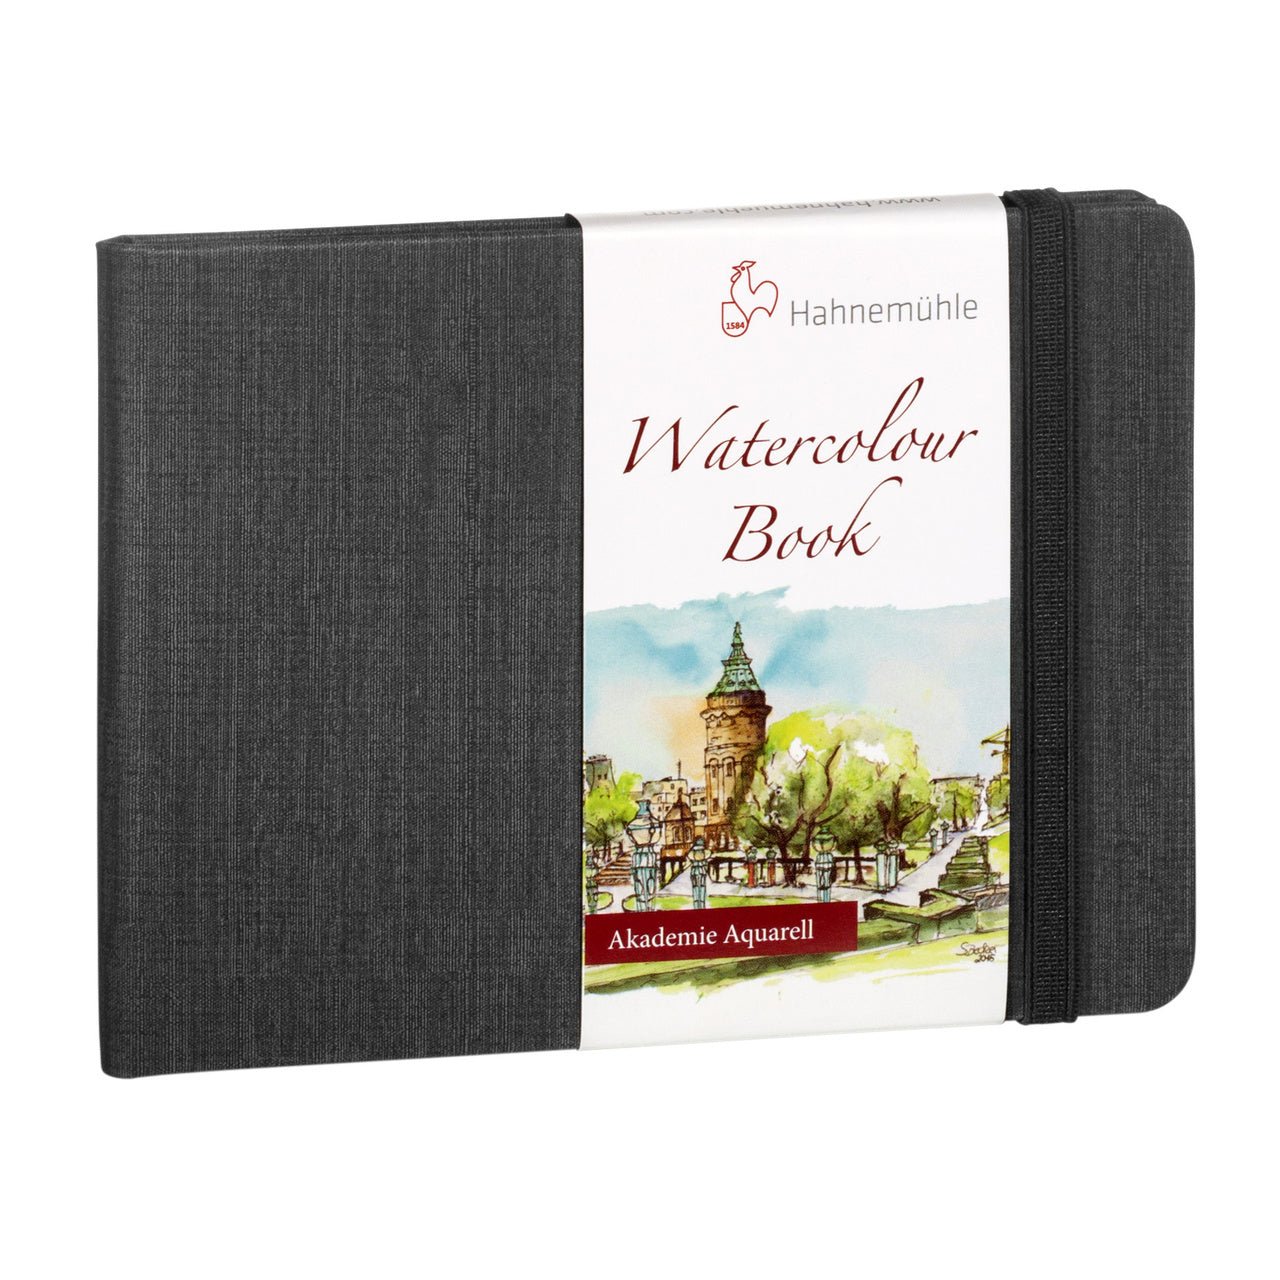 Hahnemuehle Akademie Watercolor Paper Book 8.2 inch x 11.6 inch - Landscape - merriartist.com